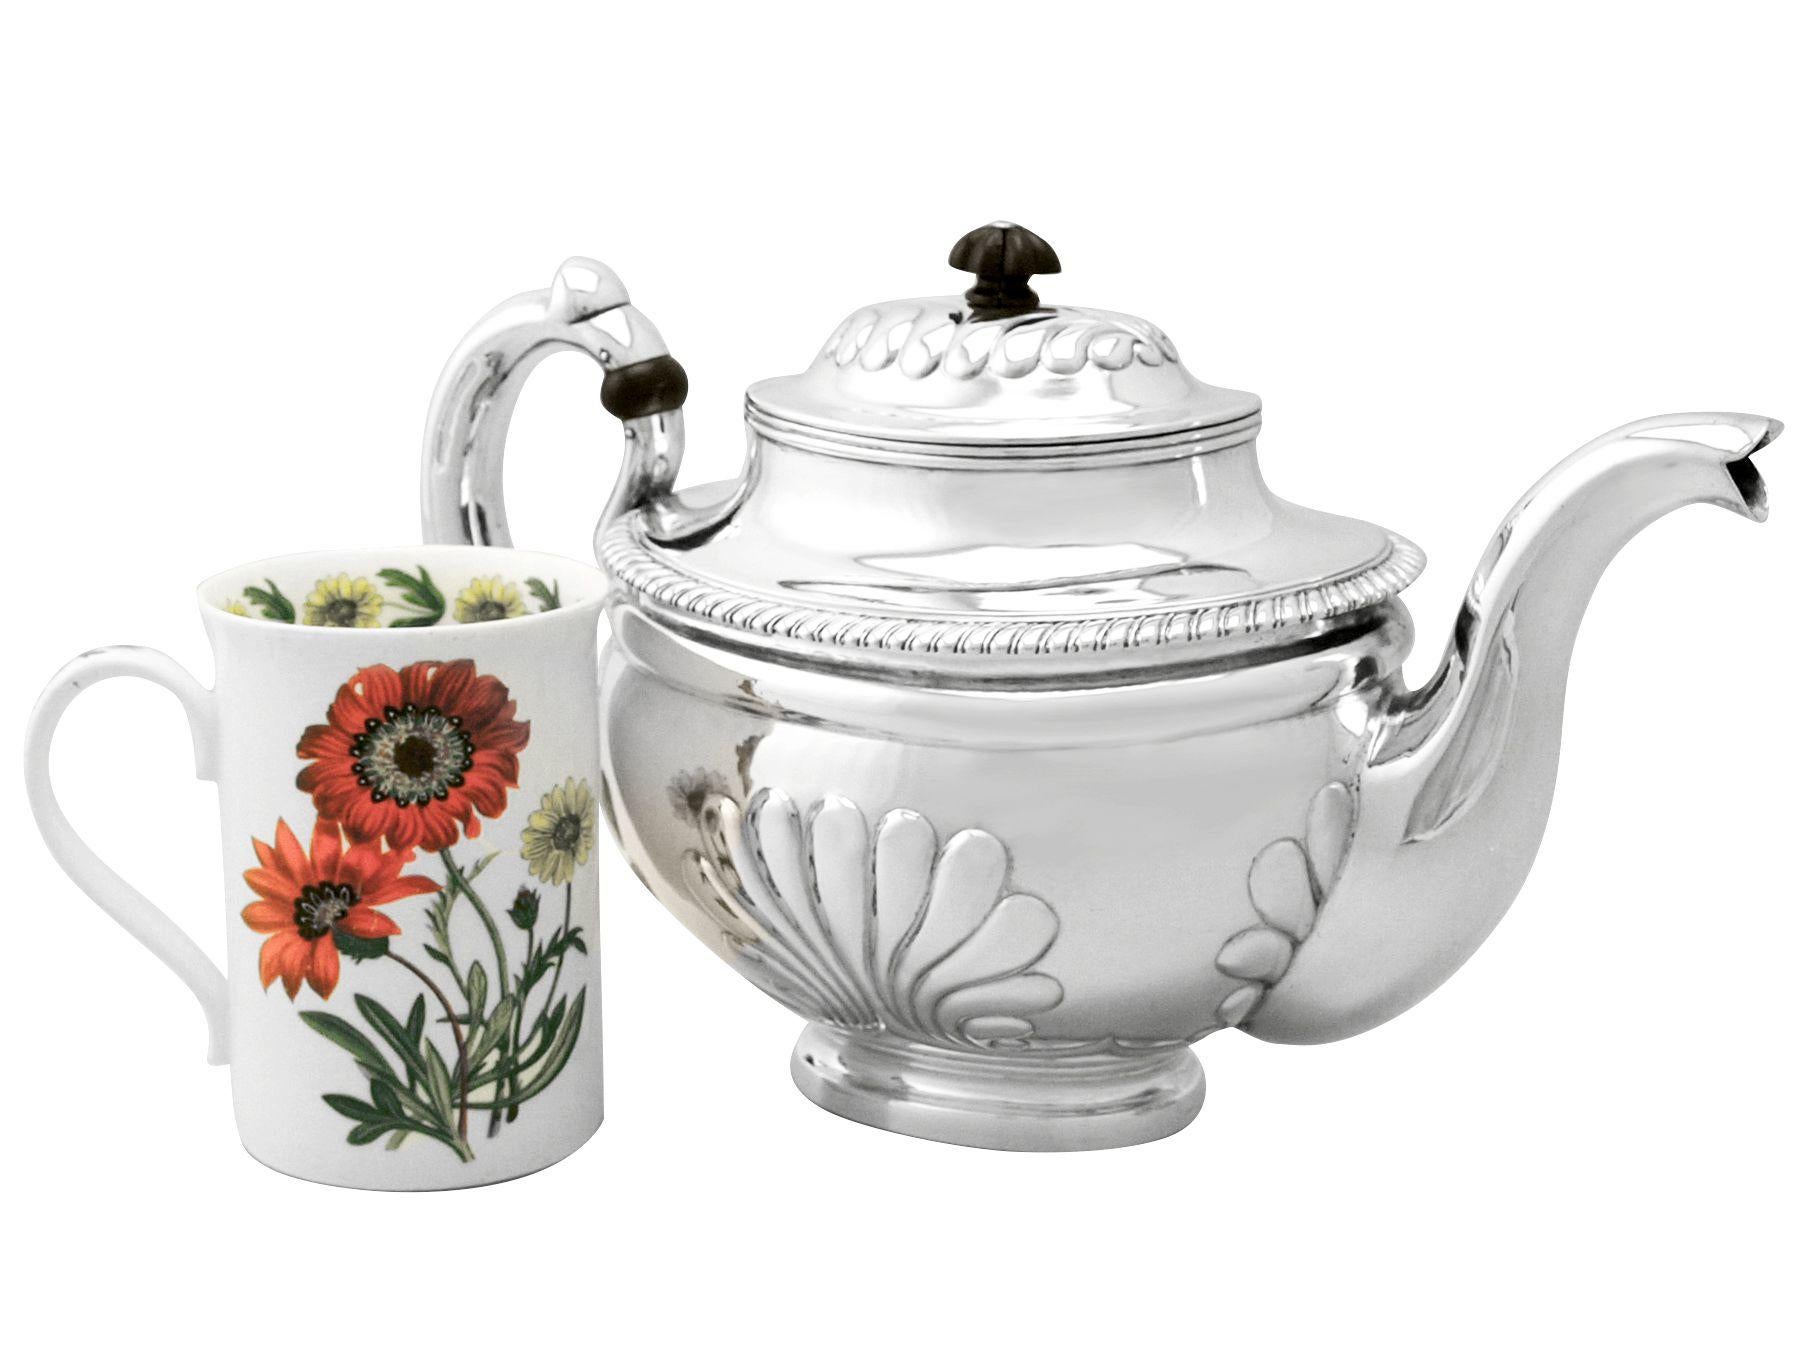 An exceptional, fine and impressive antique Finnish silver teapot; an addition to our diverse continental teaware collection.

This exceptional antique Finnish silver teapot has a plain oval rounded form onto a collet style foot.

The lower